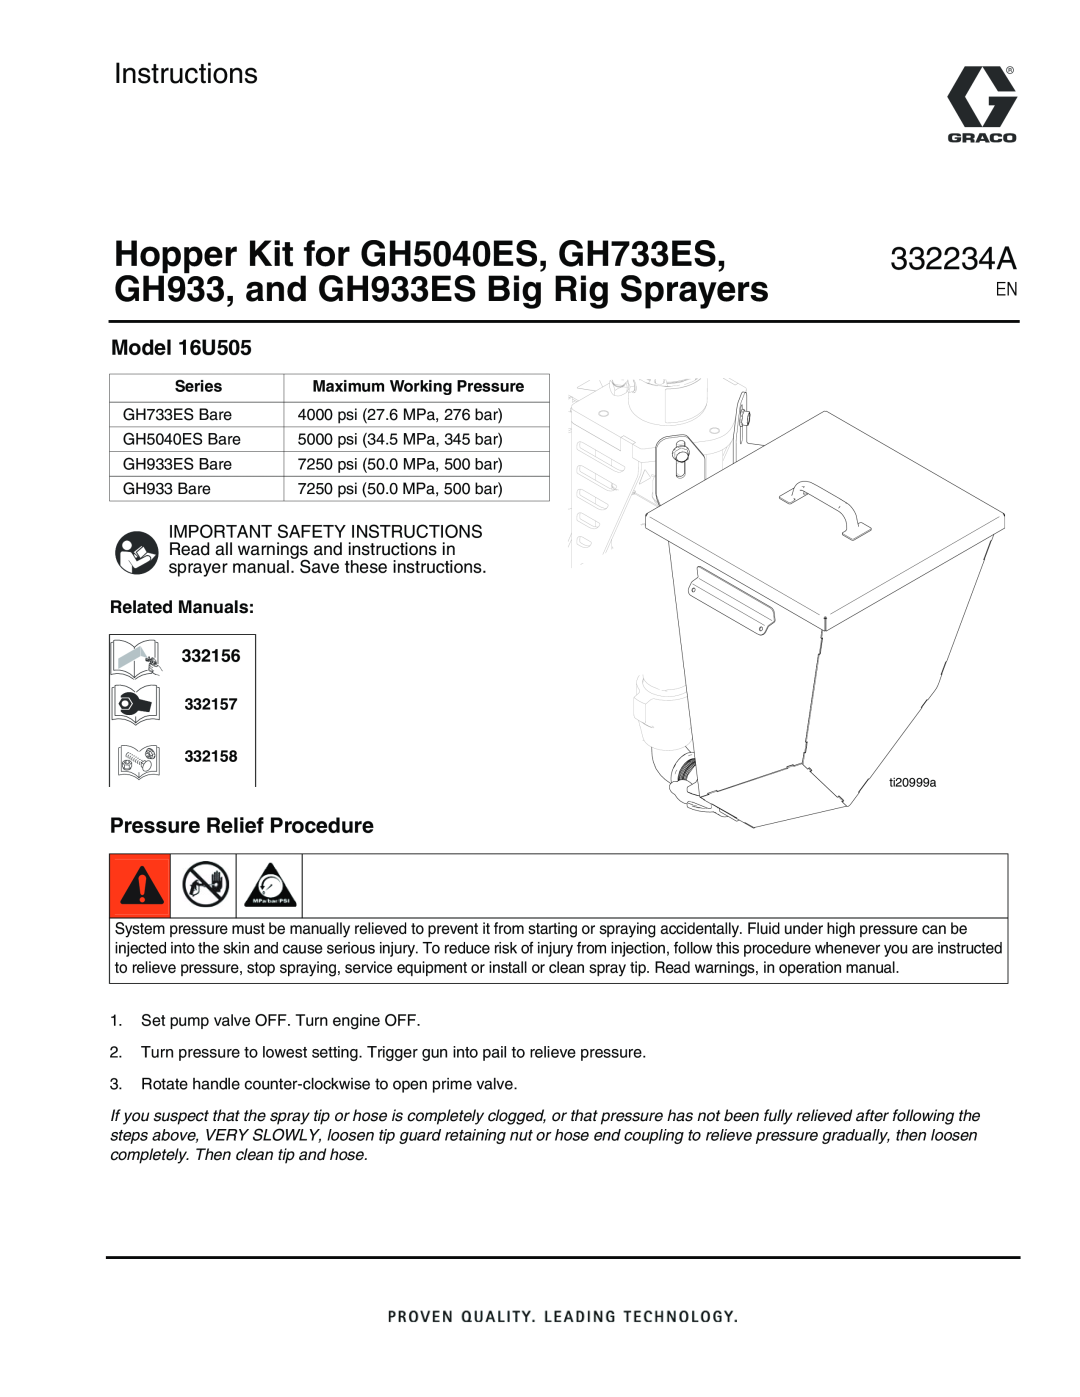 Graco important safety instructions Model 16U505, Pressure Relief Procedure, Related Manuals, 332234A, Instructions 